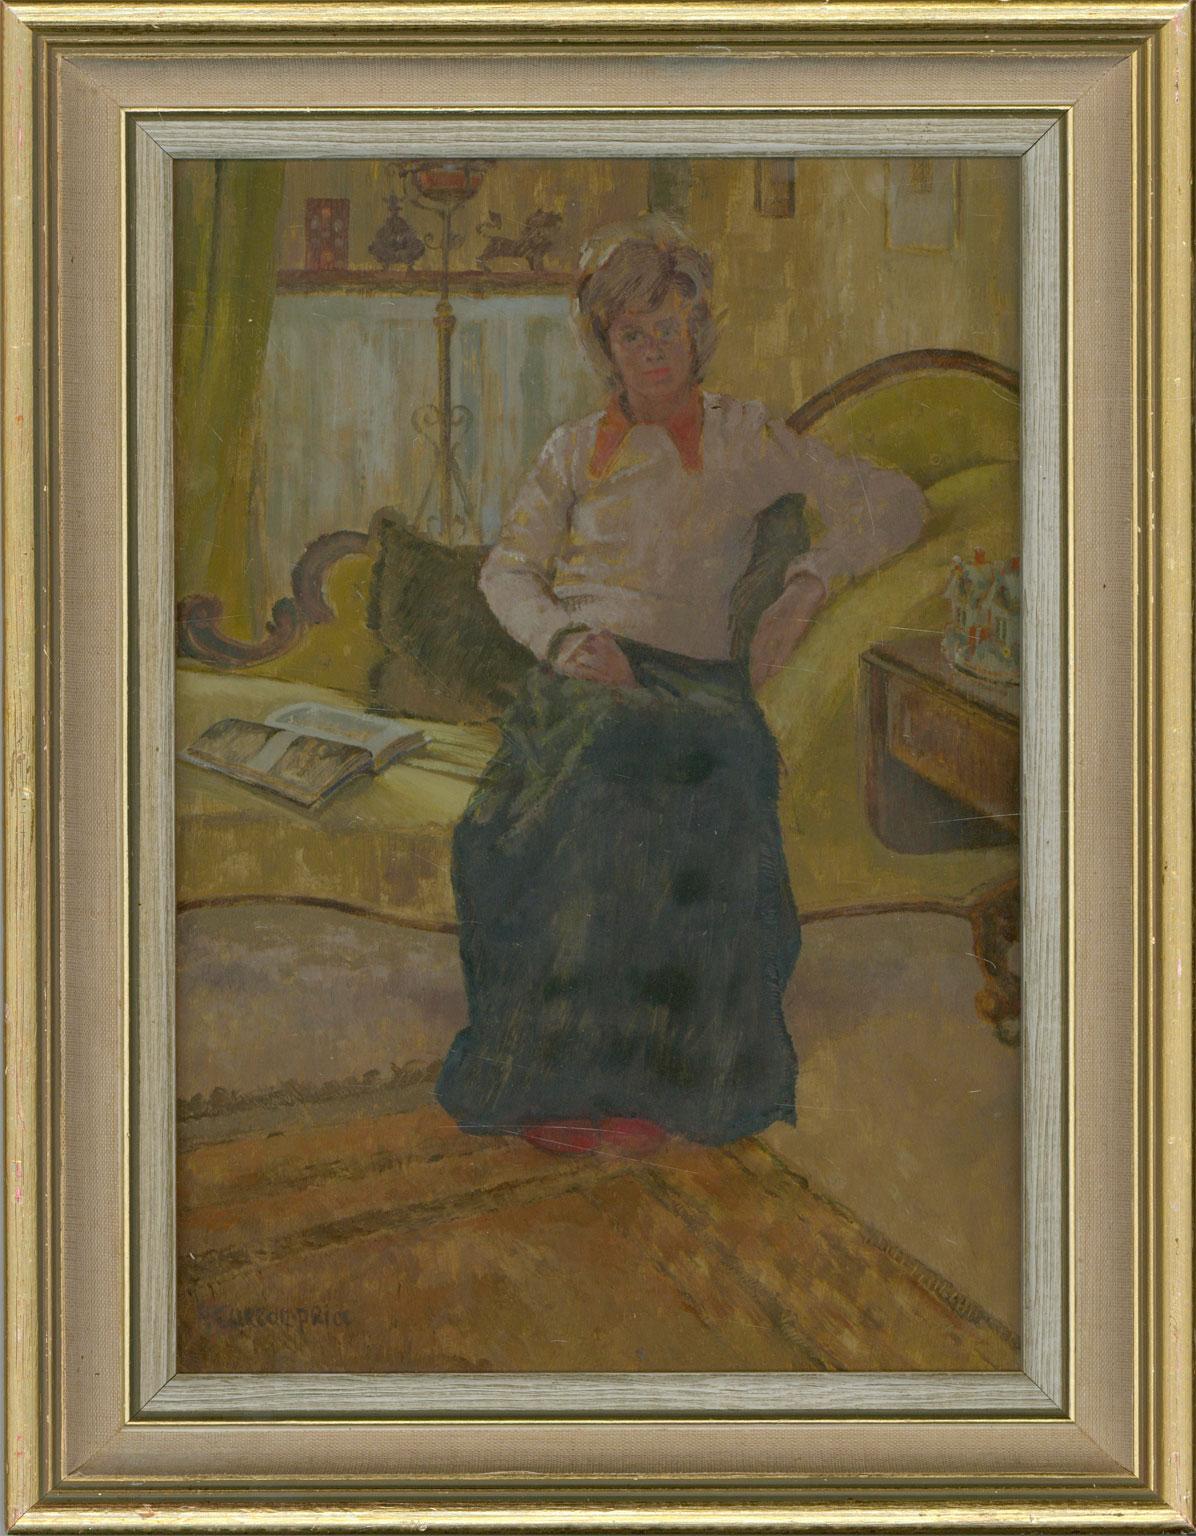 An impressive pair of oil paintings showing two seated women by Art Workers Guild member Paddy Curzon-Price. The comfortability with which both women are positioned in their domestic settings shows Curzon-Price's ability to make her sitters feel at